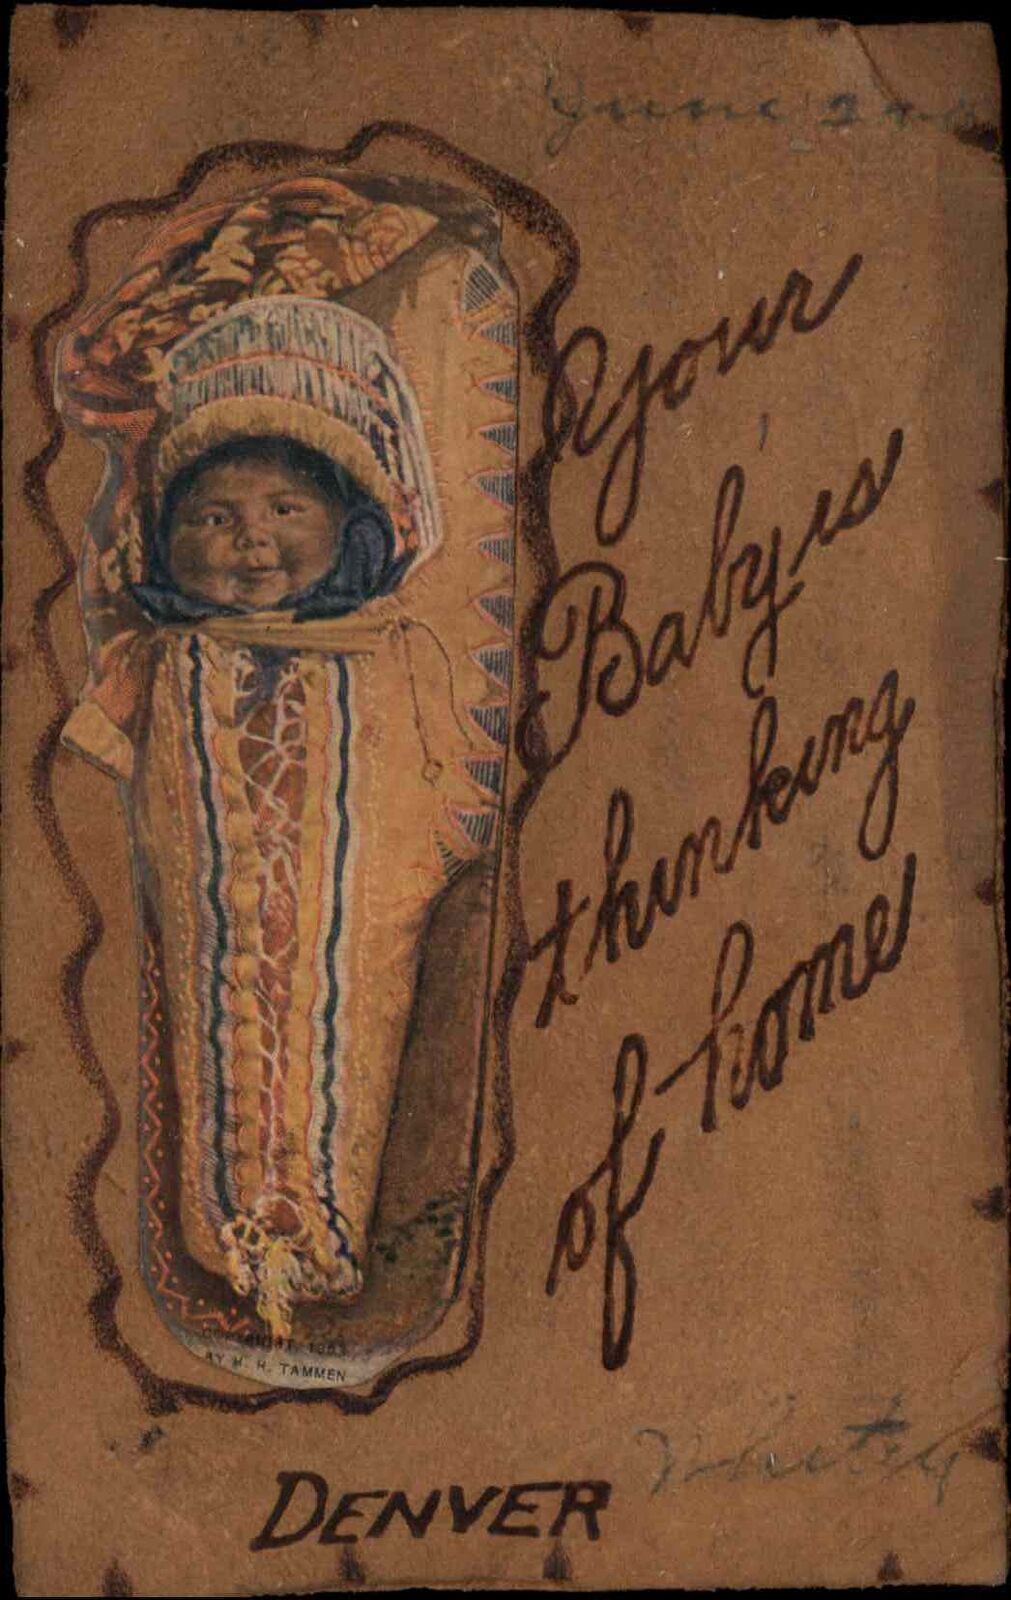 Denver Baby Papoose Native Americana HH Tammen On Leather c1910 Postcard